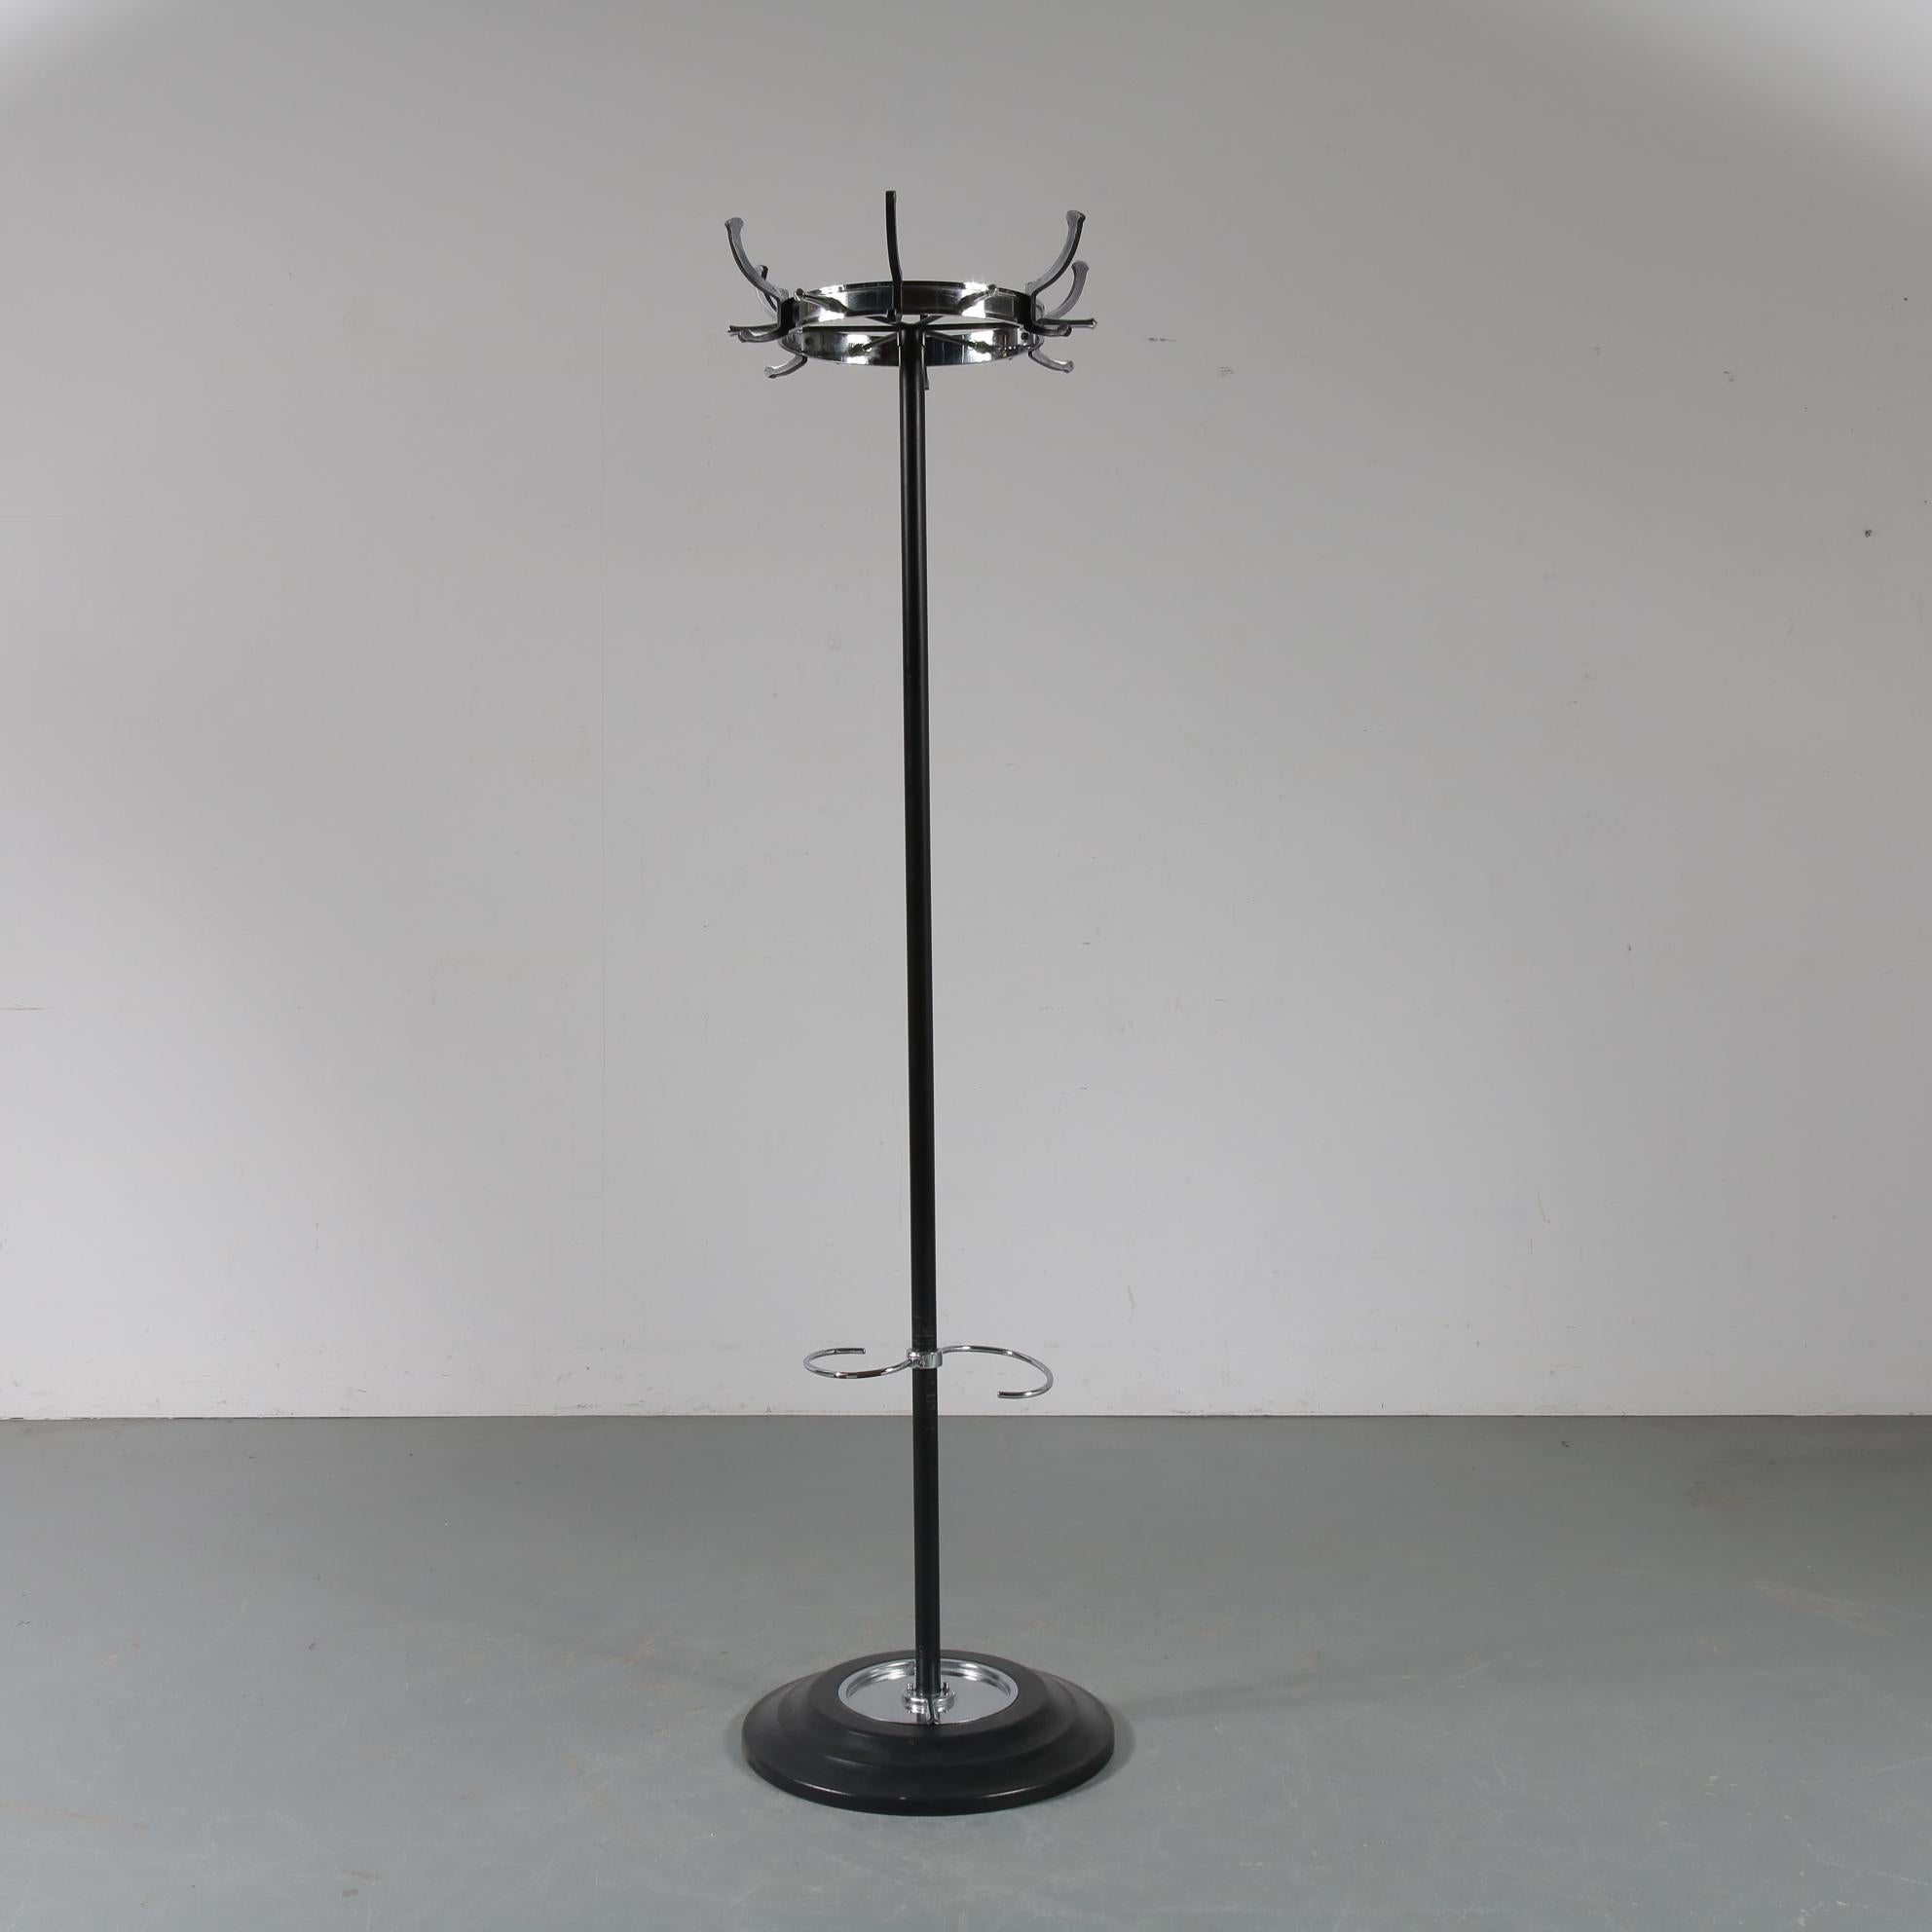 A beautiful coat rack designed by Jacques Adnet, manufactured in France, circa 1950.
This luxurious piece is made of high quality black lacquered metal with chrome. The round foot has a chrome plated inner circle, and up the black stand are two